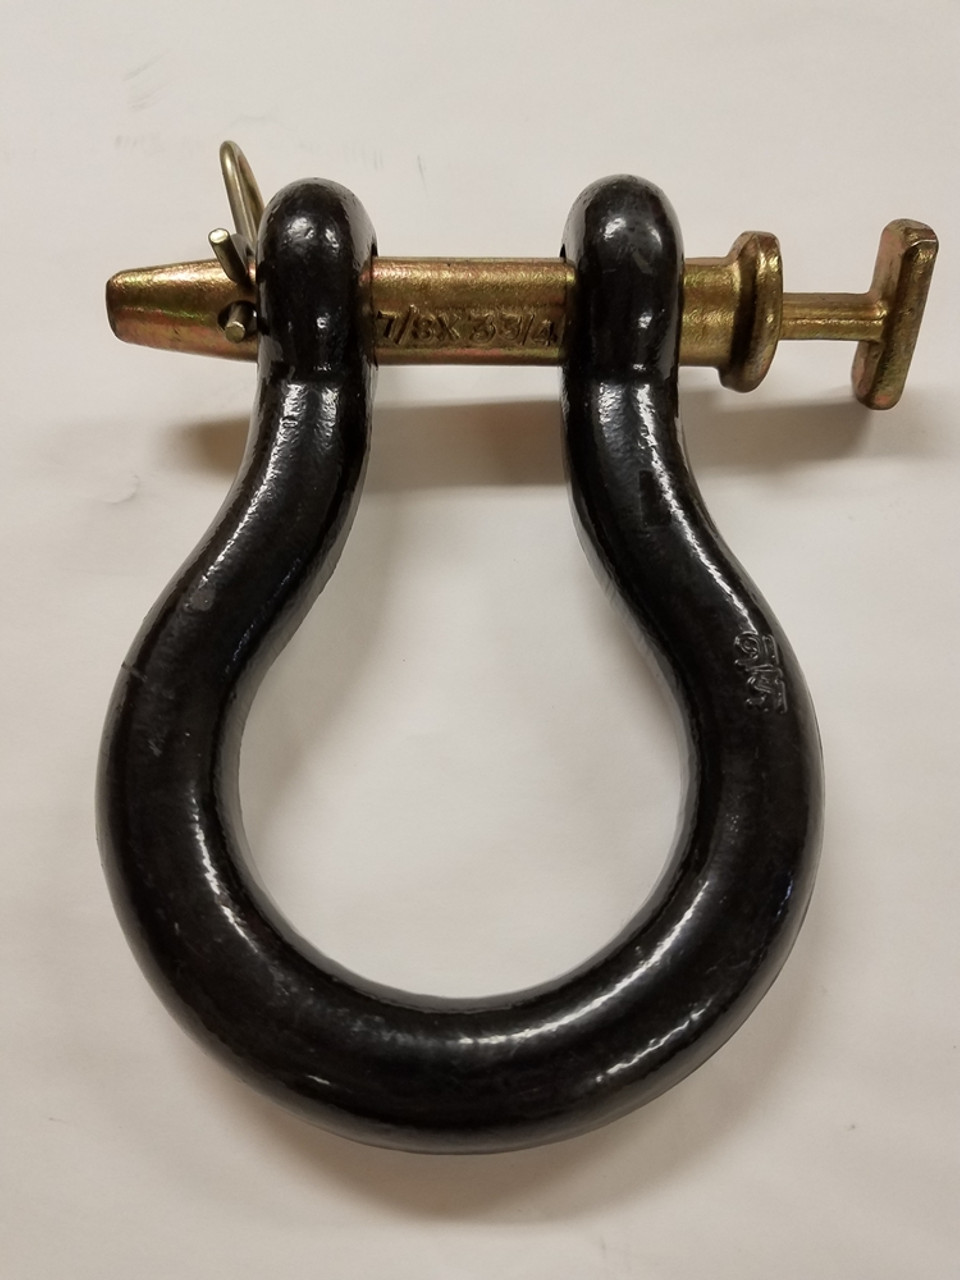 STRAIGHT CLEVIS 15/16 X 7/8 20,000#WLL